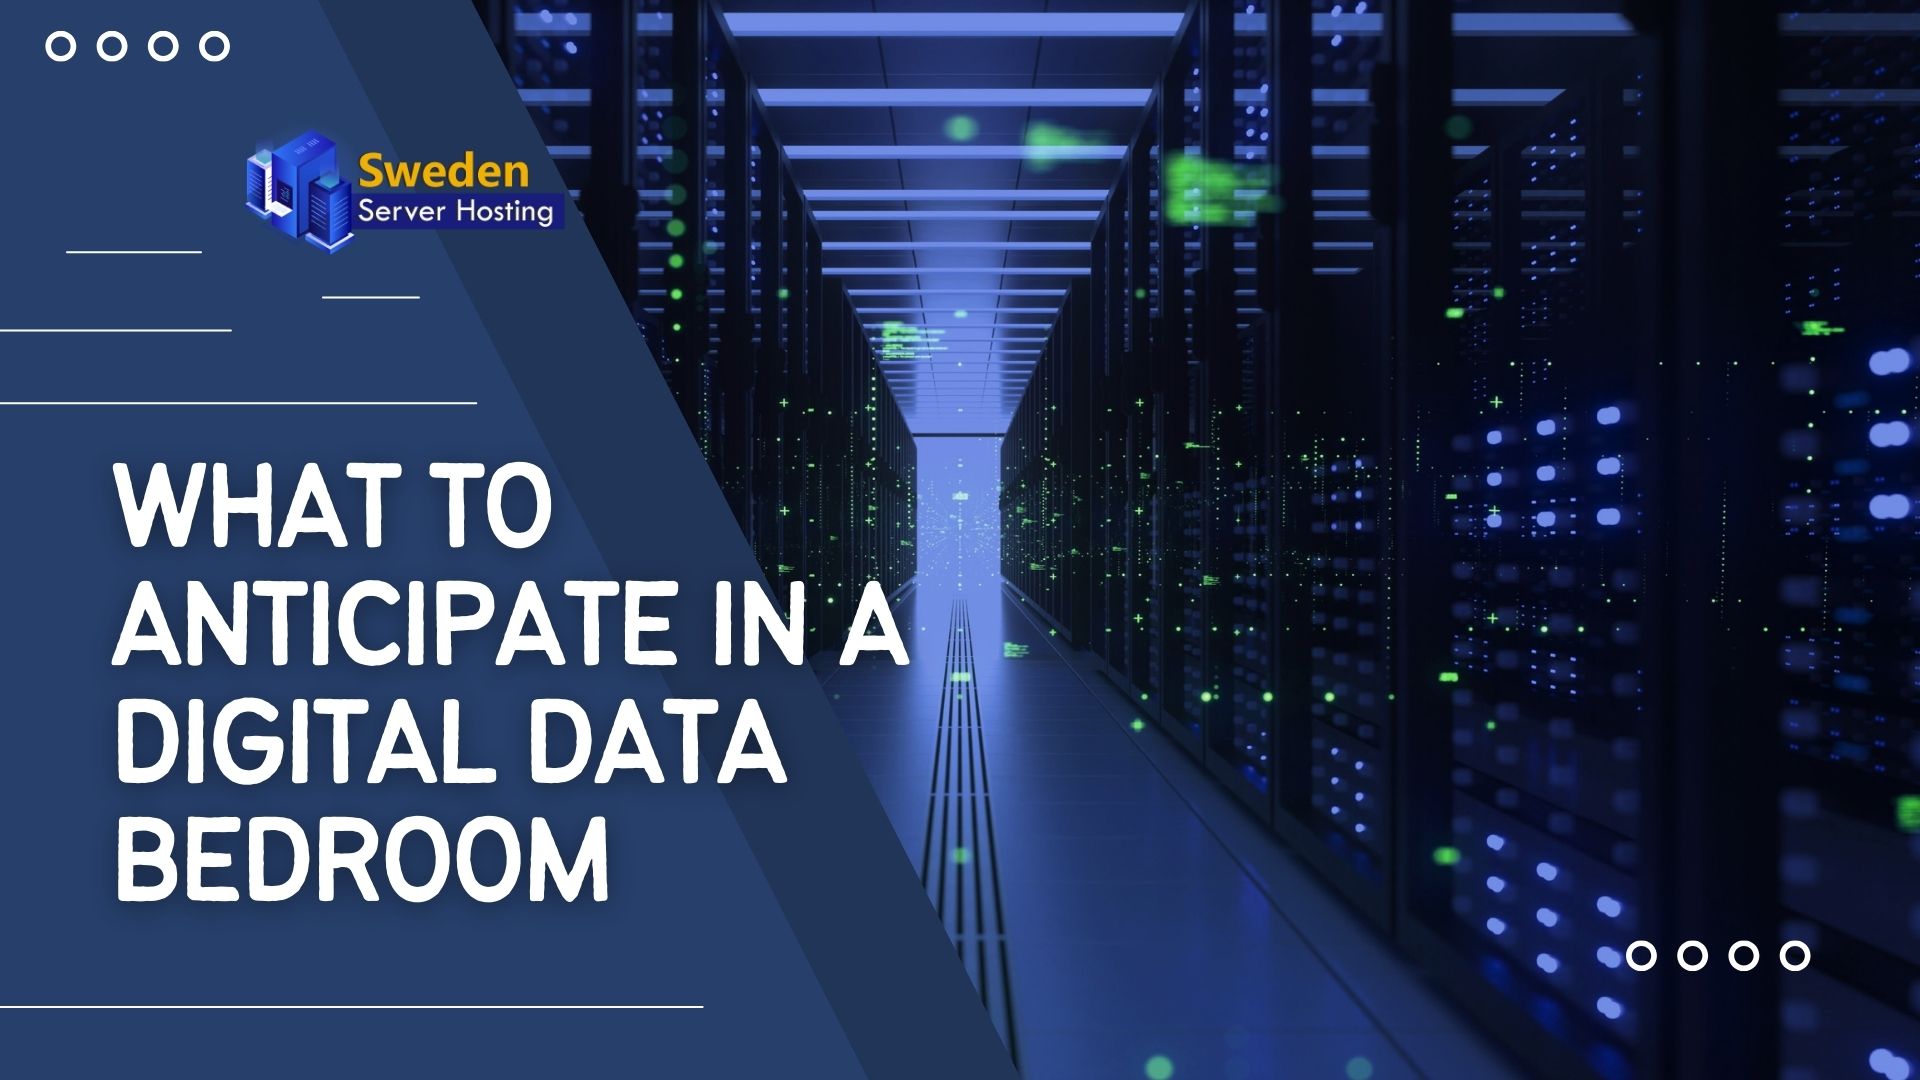 What To Anticipate in A Digital Data Bedroom